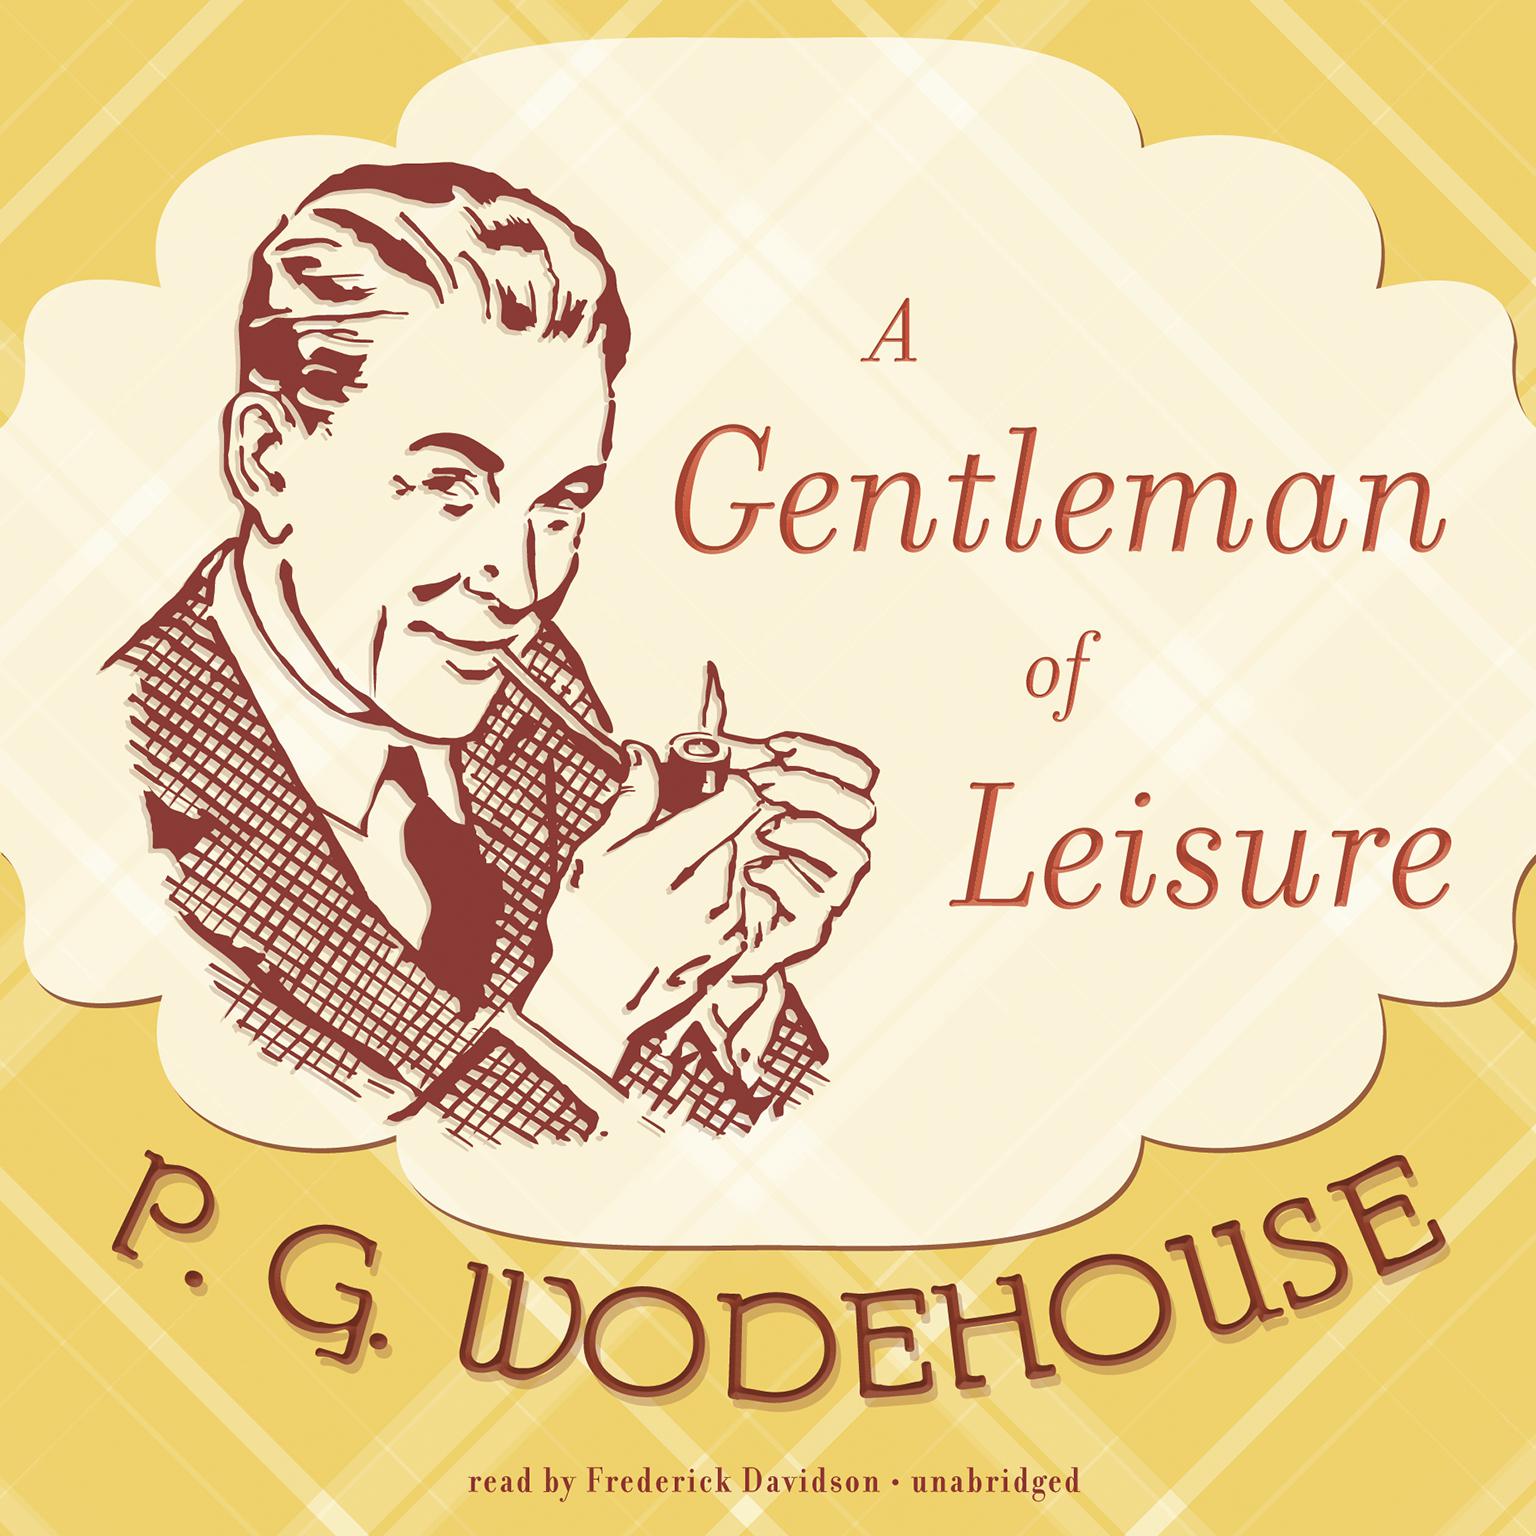 A Gentleman of Leisure Audiobook, by P. G. Wodehouse